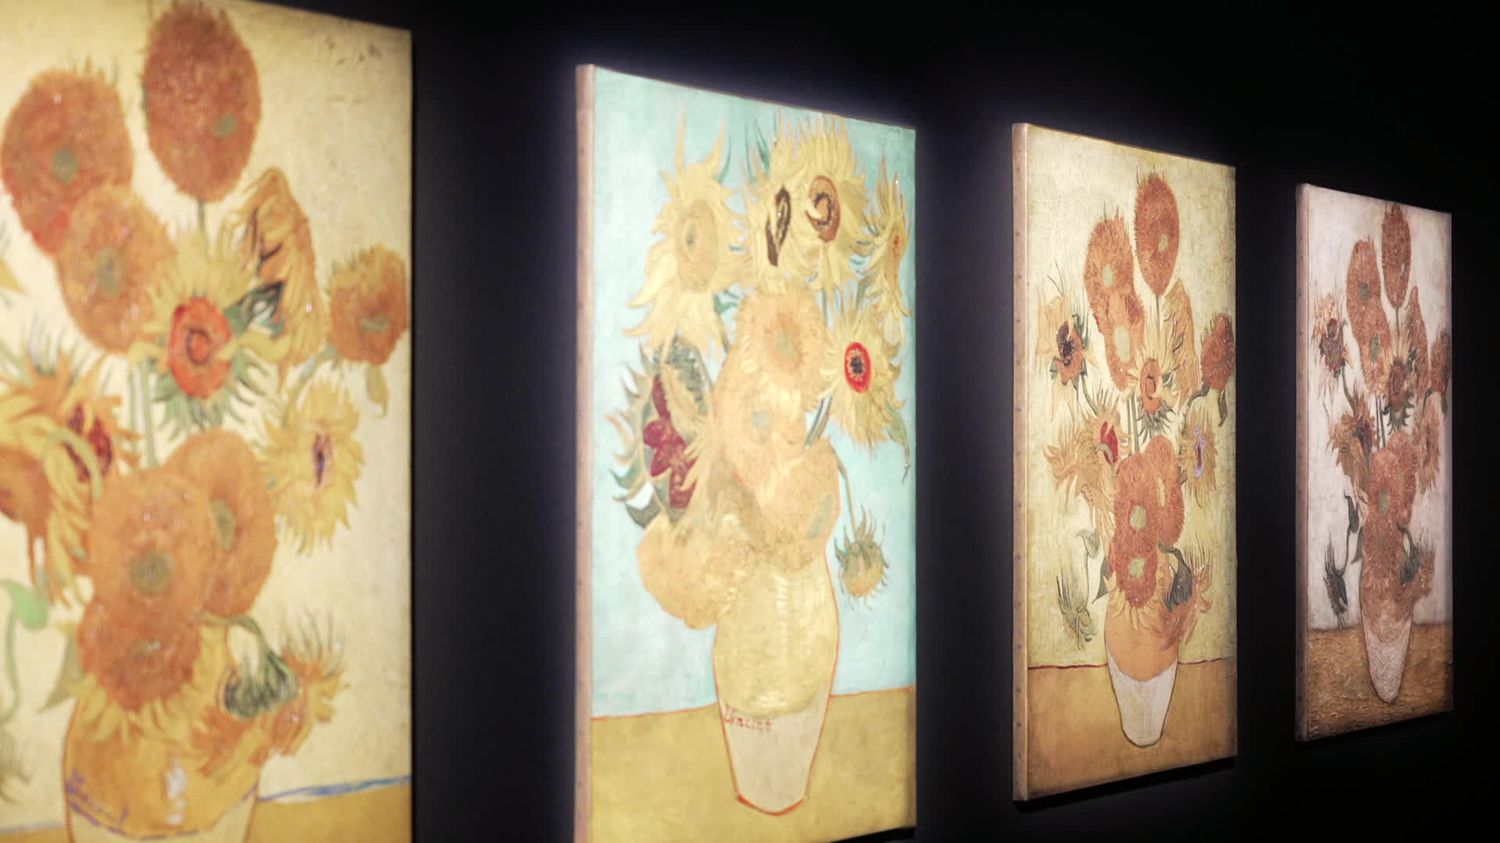 In Marseille, immerse yourself in the world of Vincent Van Gogh at an impressive exhibition